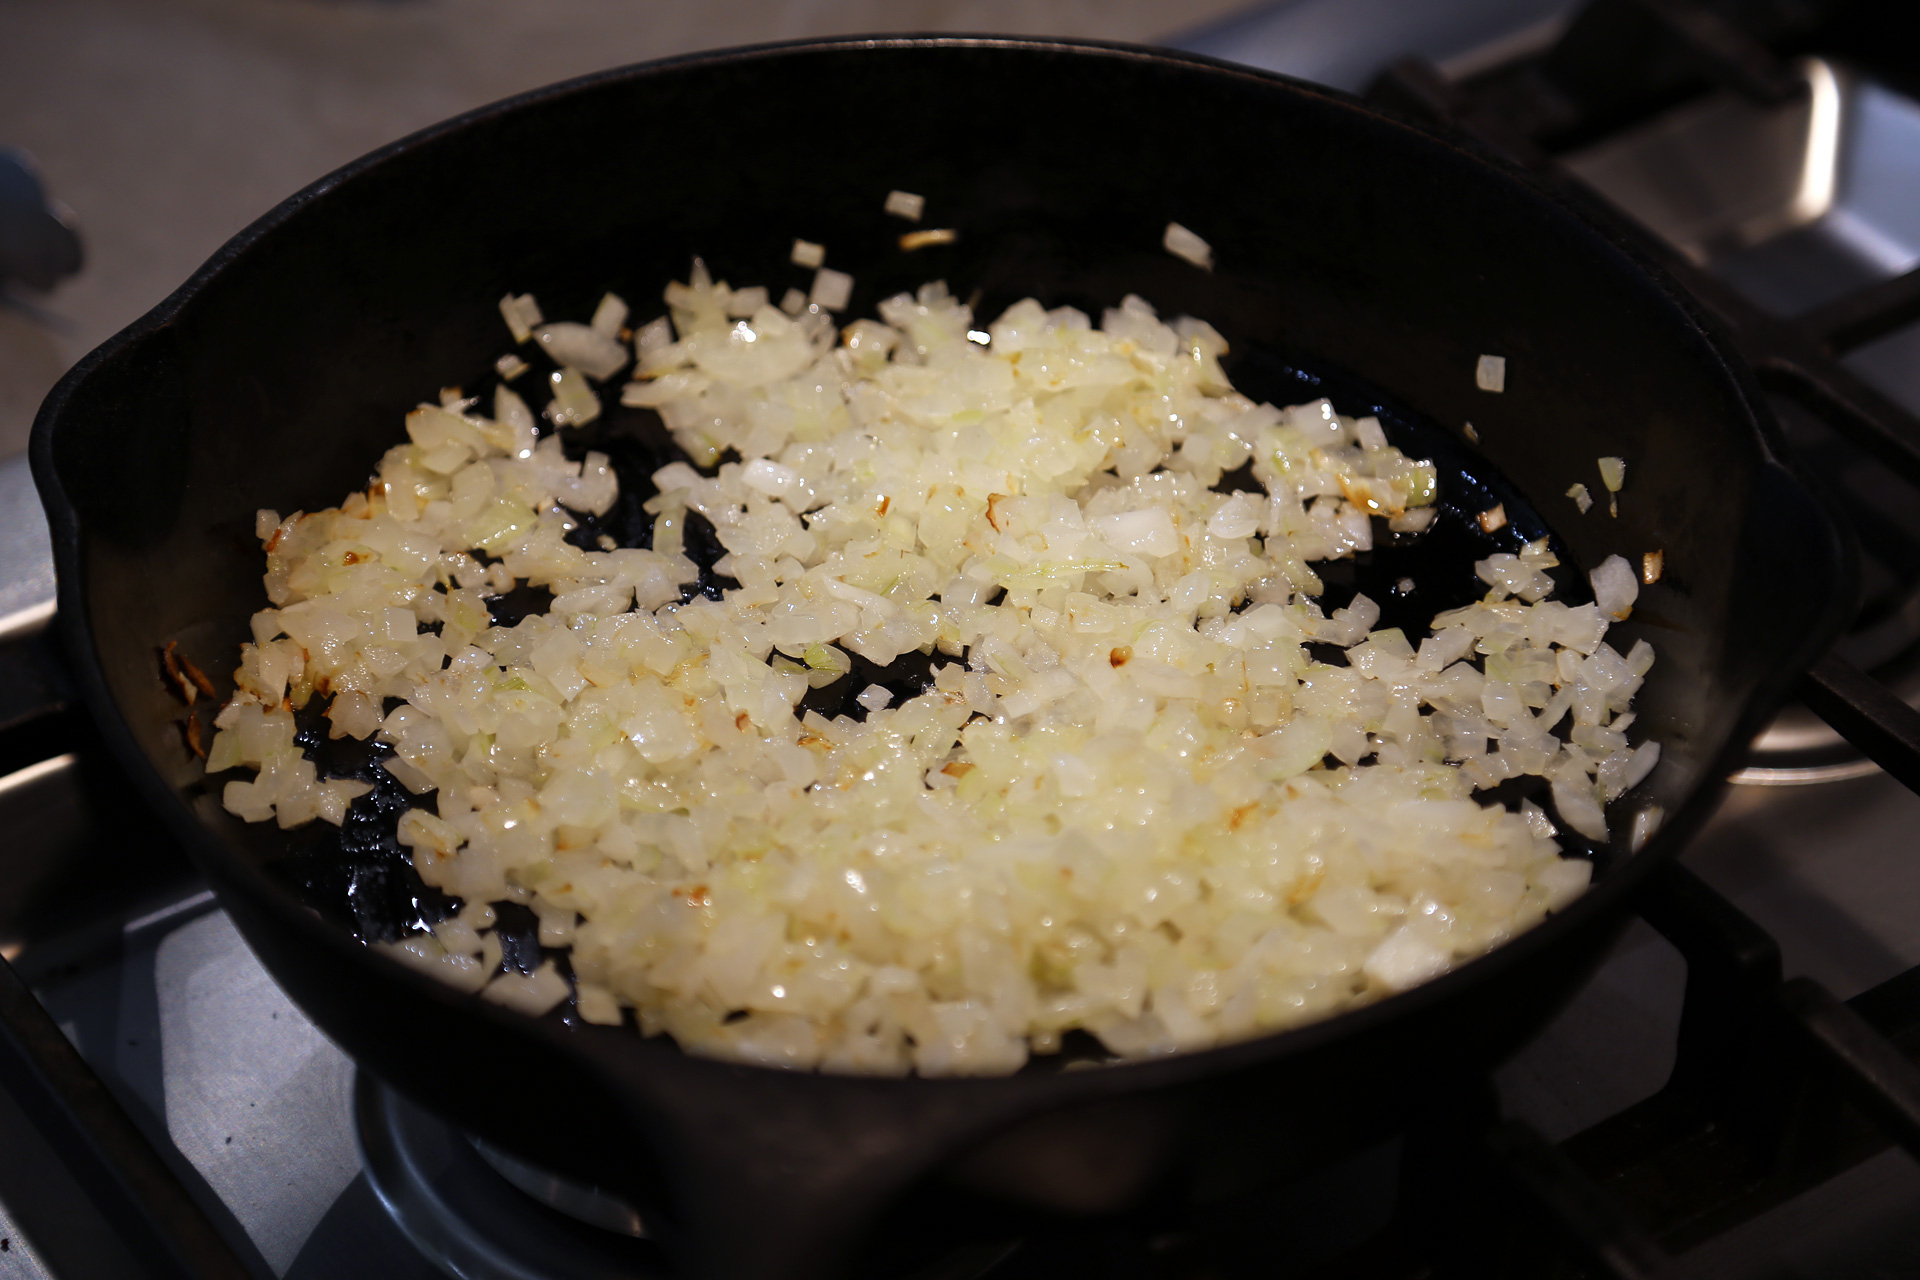 Add the oil to the skillet and heat the oil over medium heat. Add the onion and cook, stirring, until softened and starting to brown, about 8 minutes.